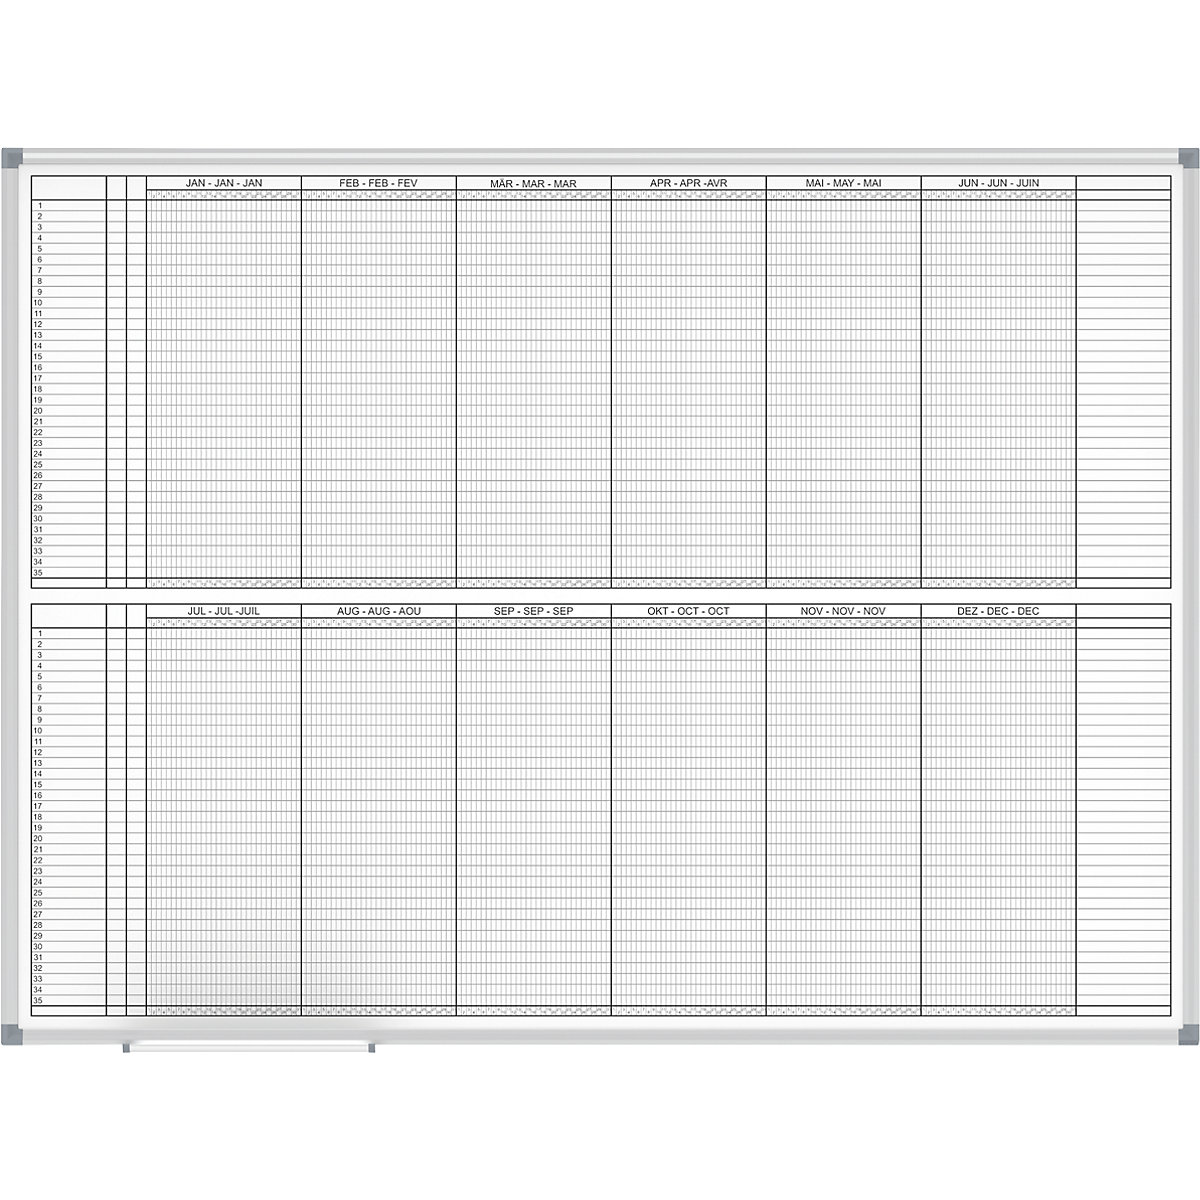 Tableau planning – MAUL: planning annuel, 2 x 6 mois